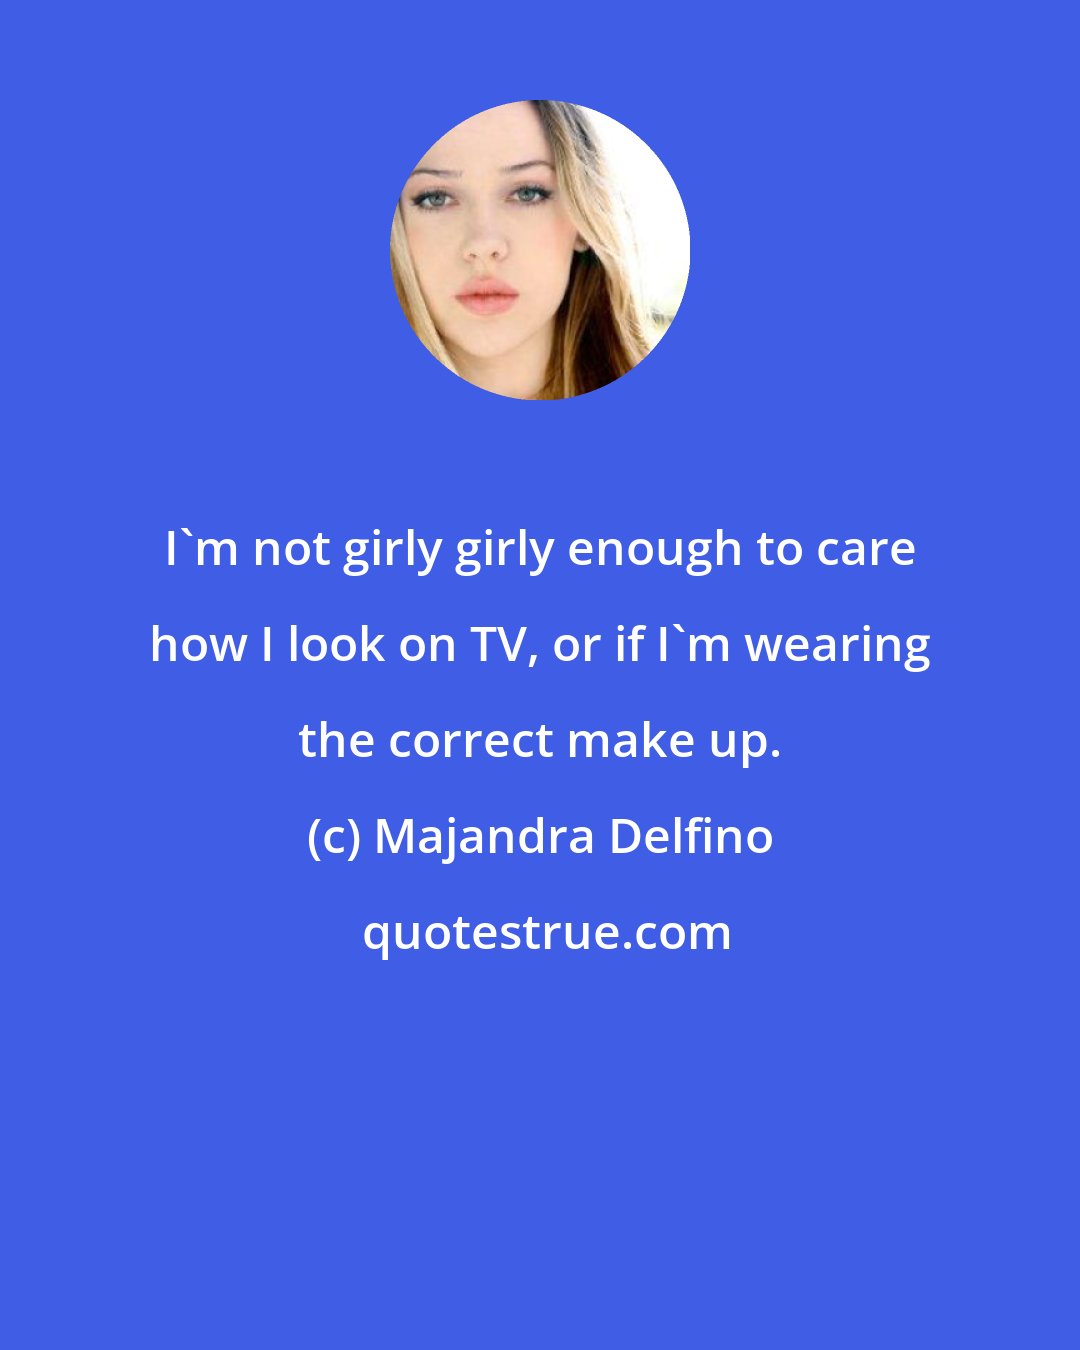 Majandra Delfino: I'm not girly girly enough to care how I look on TV, or if I'm wearing the correct make up.